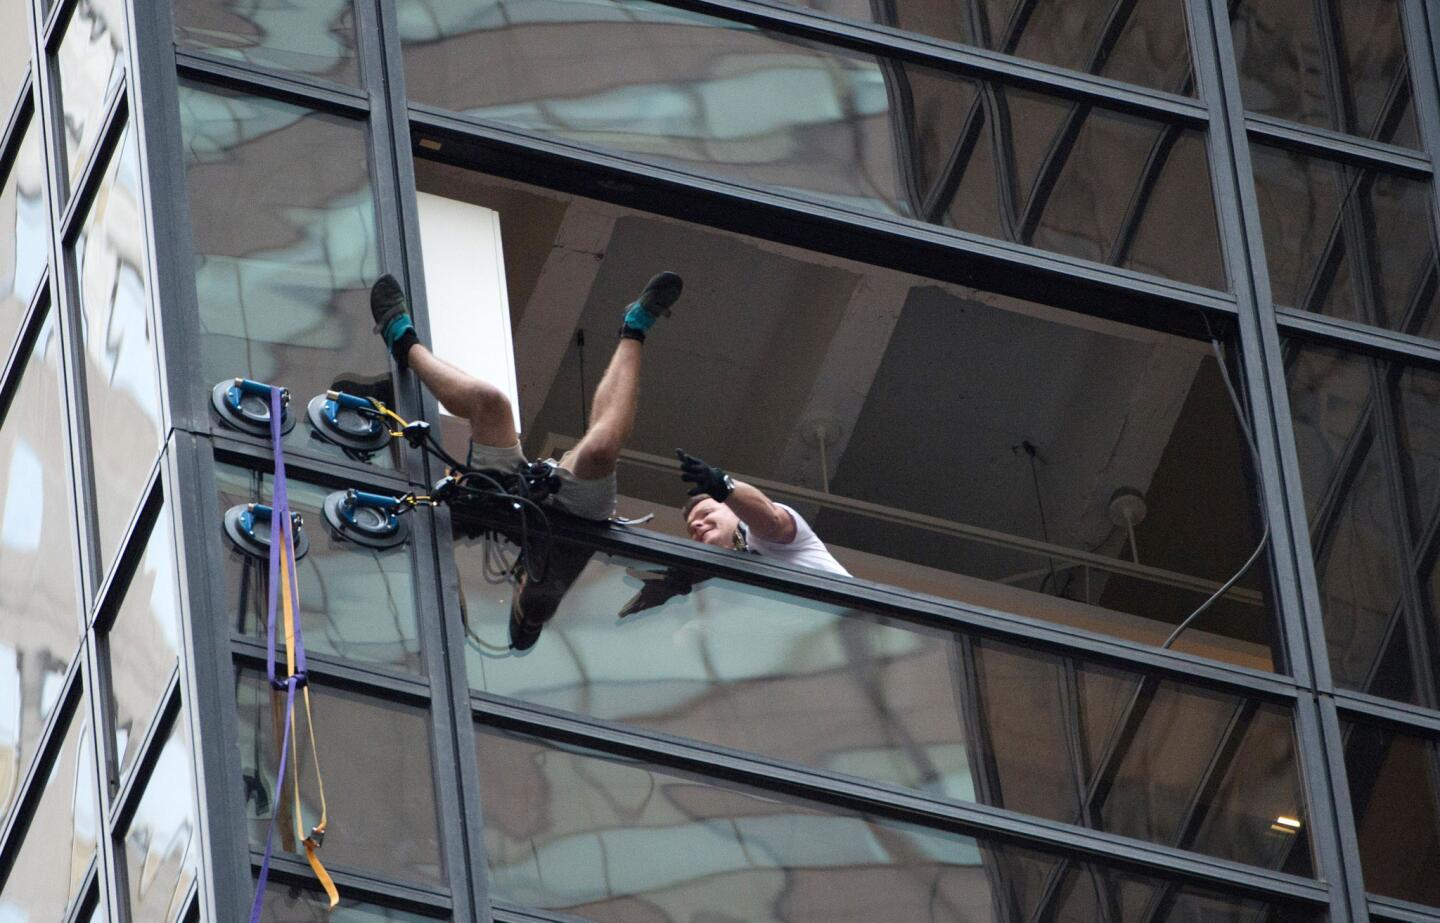 Police grab a man scaling Trump Tower using suction cups on Aug. 10, 2016, in New York.